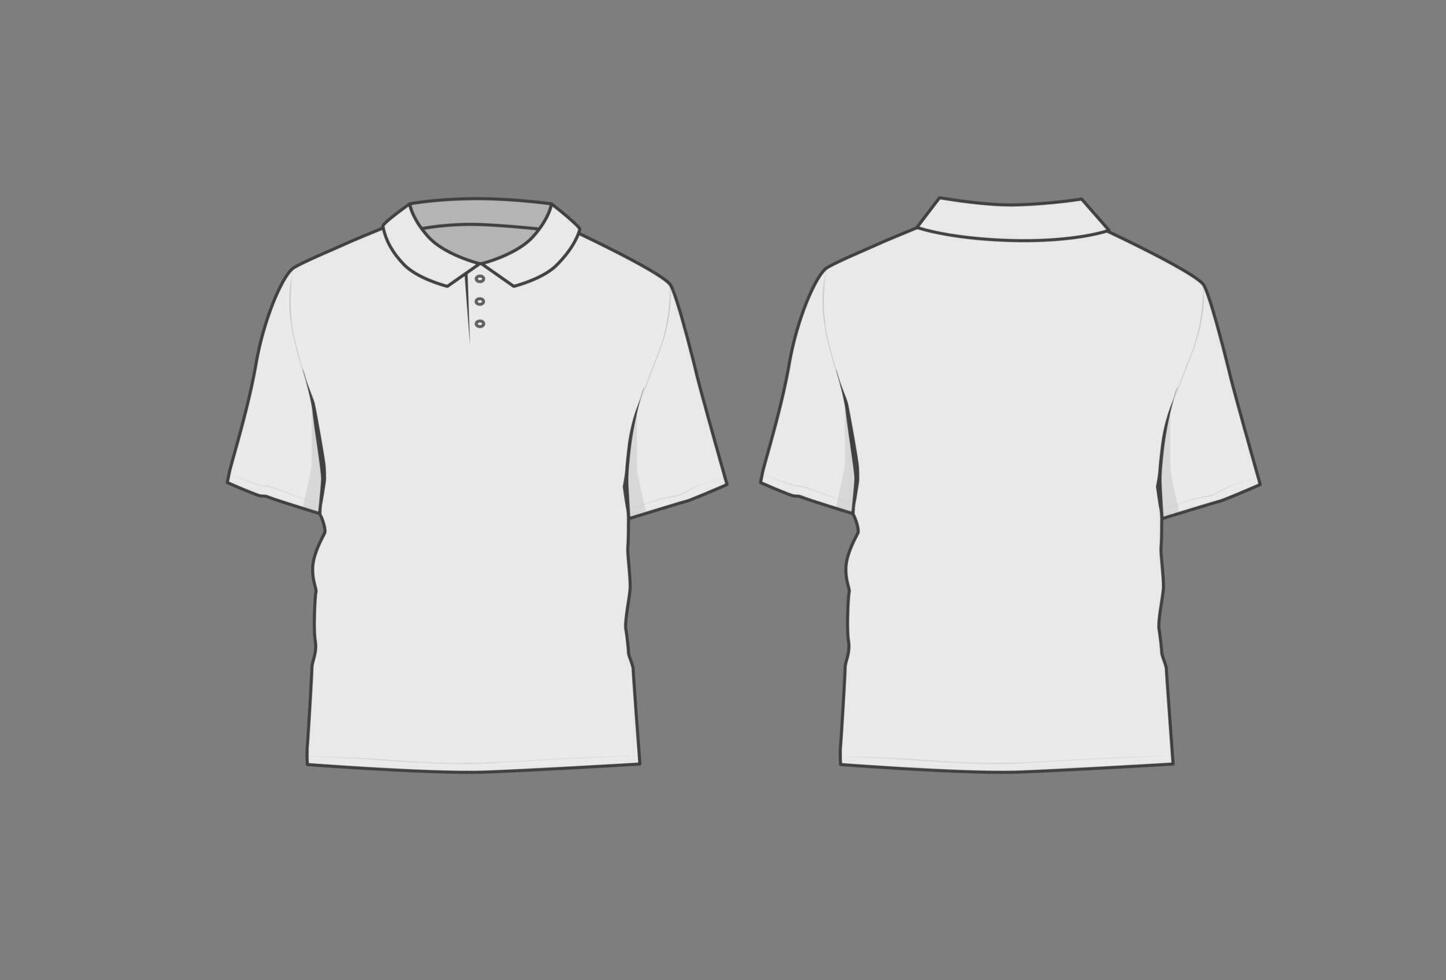 Basic black mal polo shirt mockup. Front and back view. Blank textile print template for fashion clothing. vector